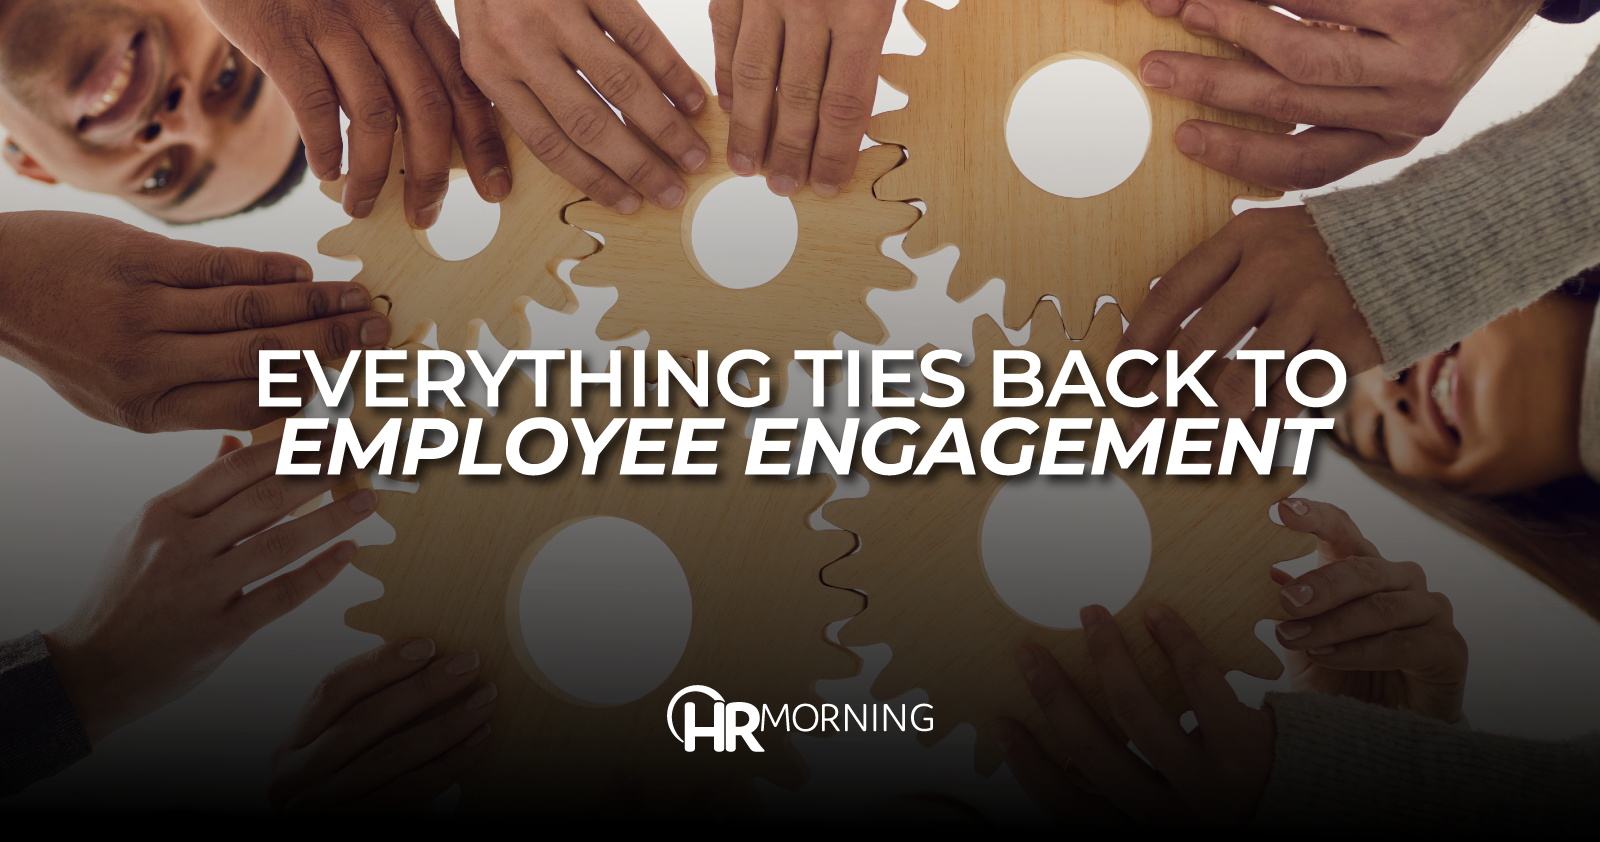 Everything ties back to employee engagement